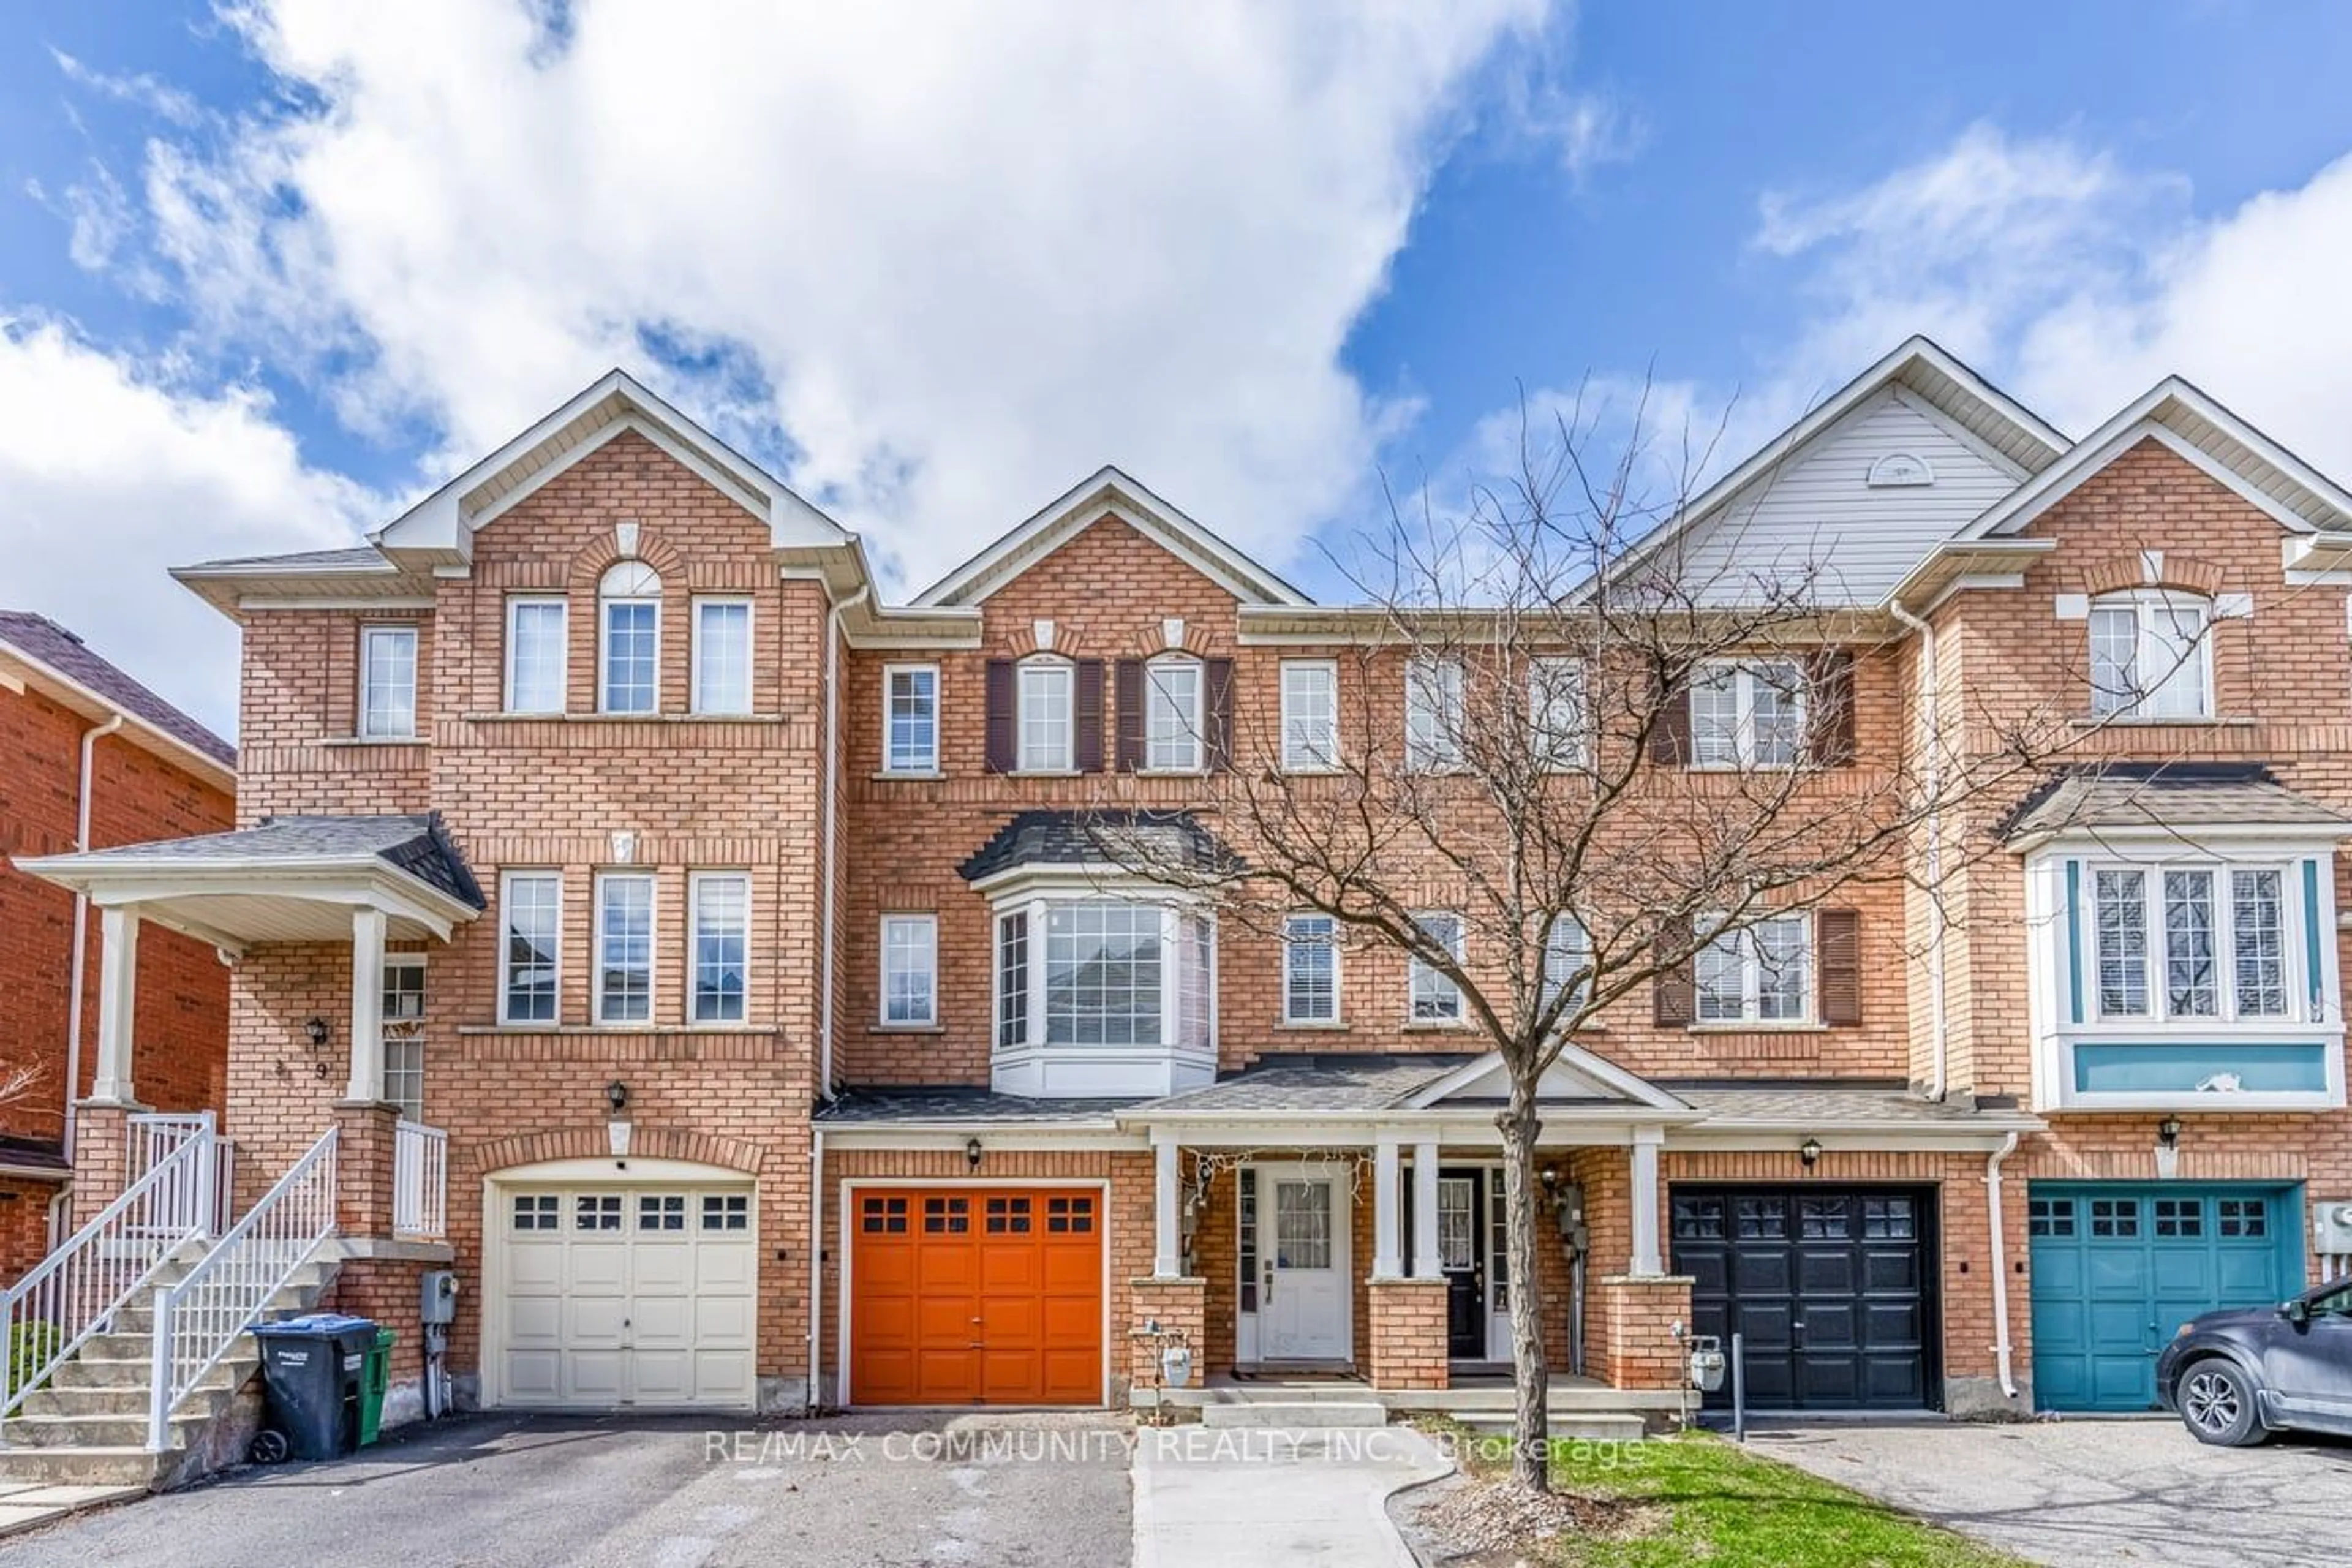 Home with brick exterior material for 271 Richvale Dr #10, Brampton Ontario L6Z 4W8